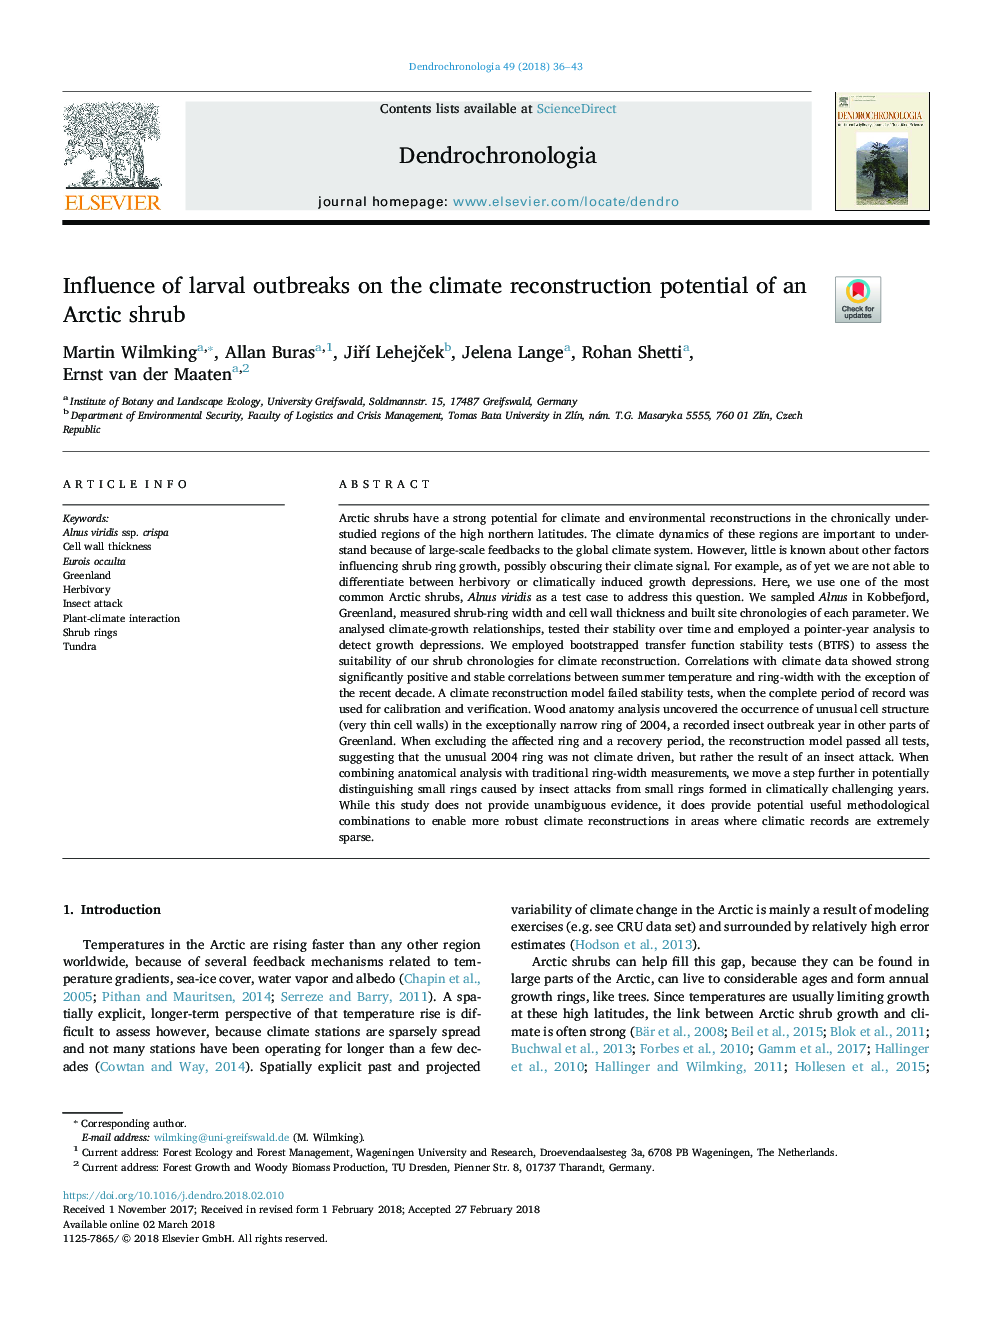 Influence of larval outbreaks on the climate reconstruction potential of an Arctic shrub